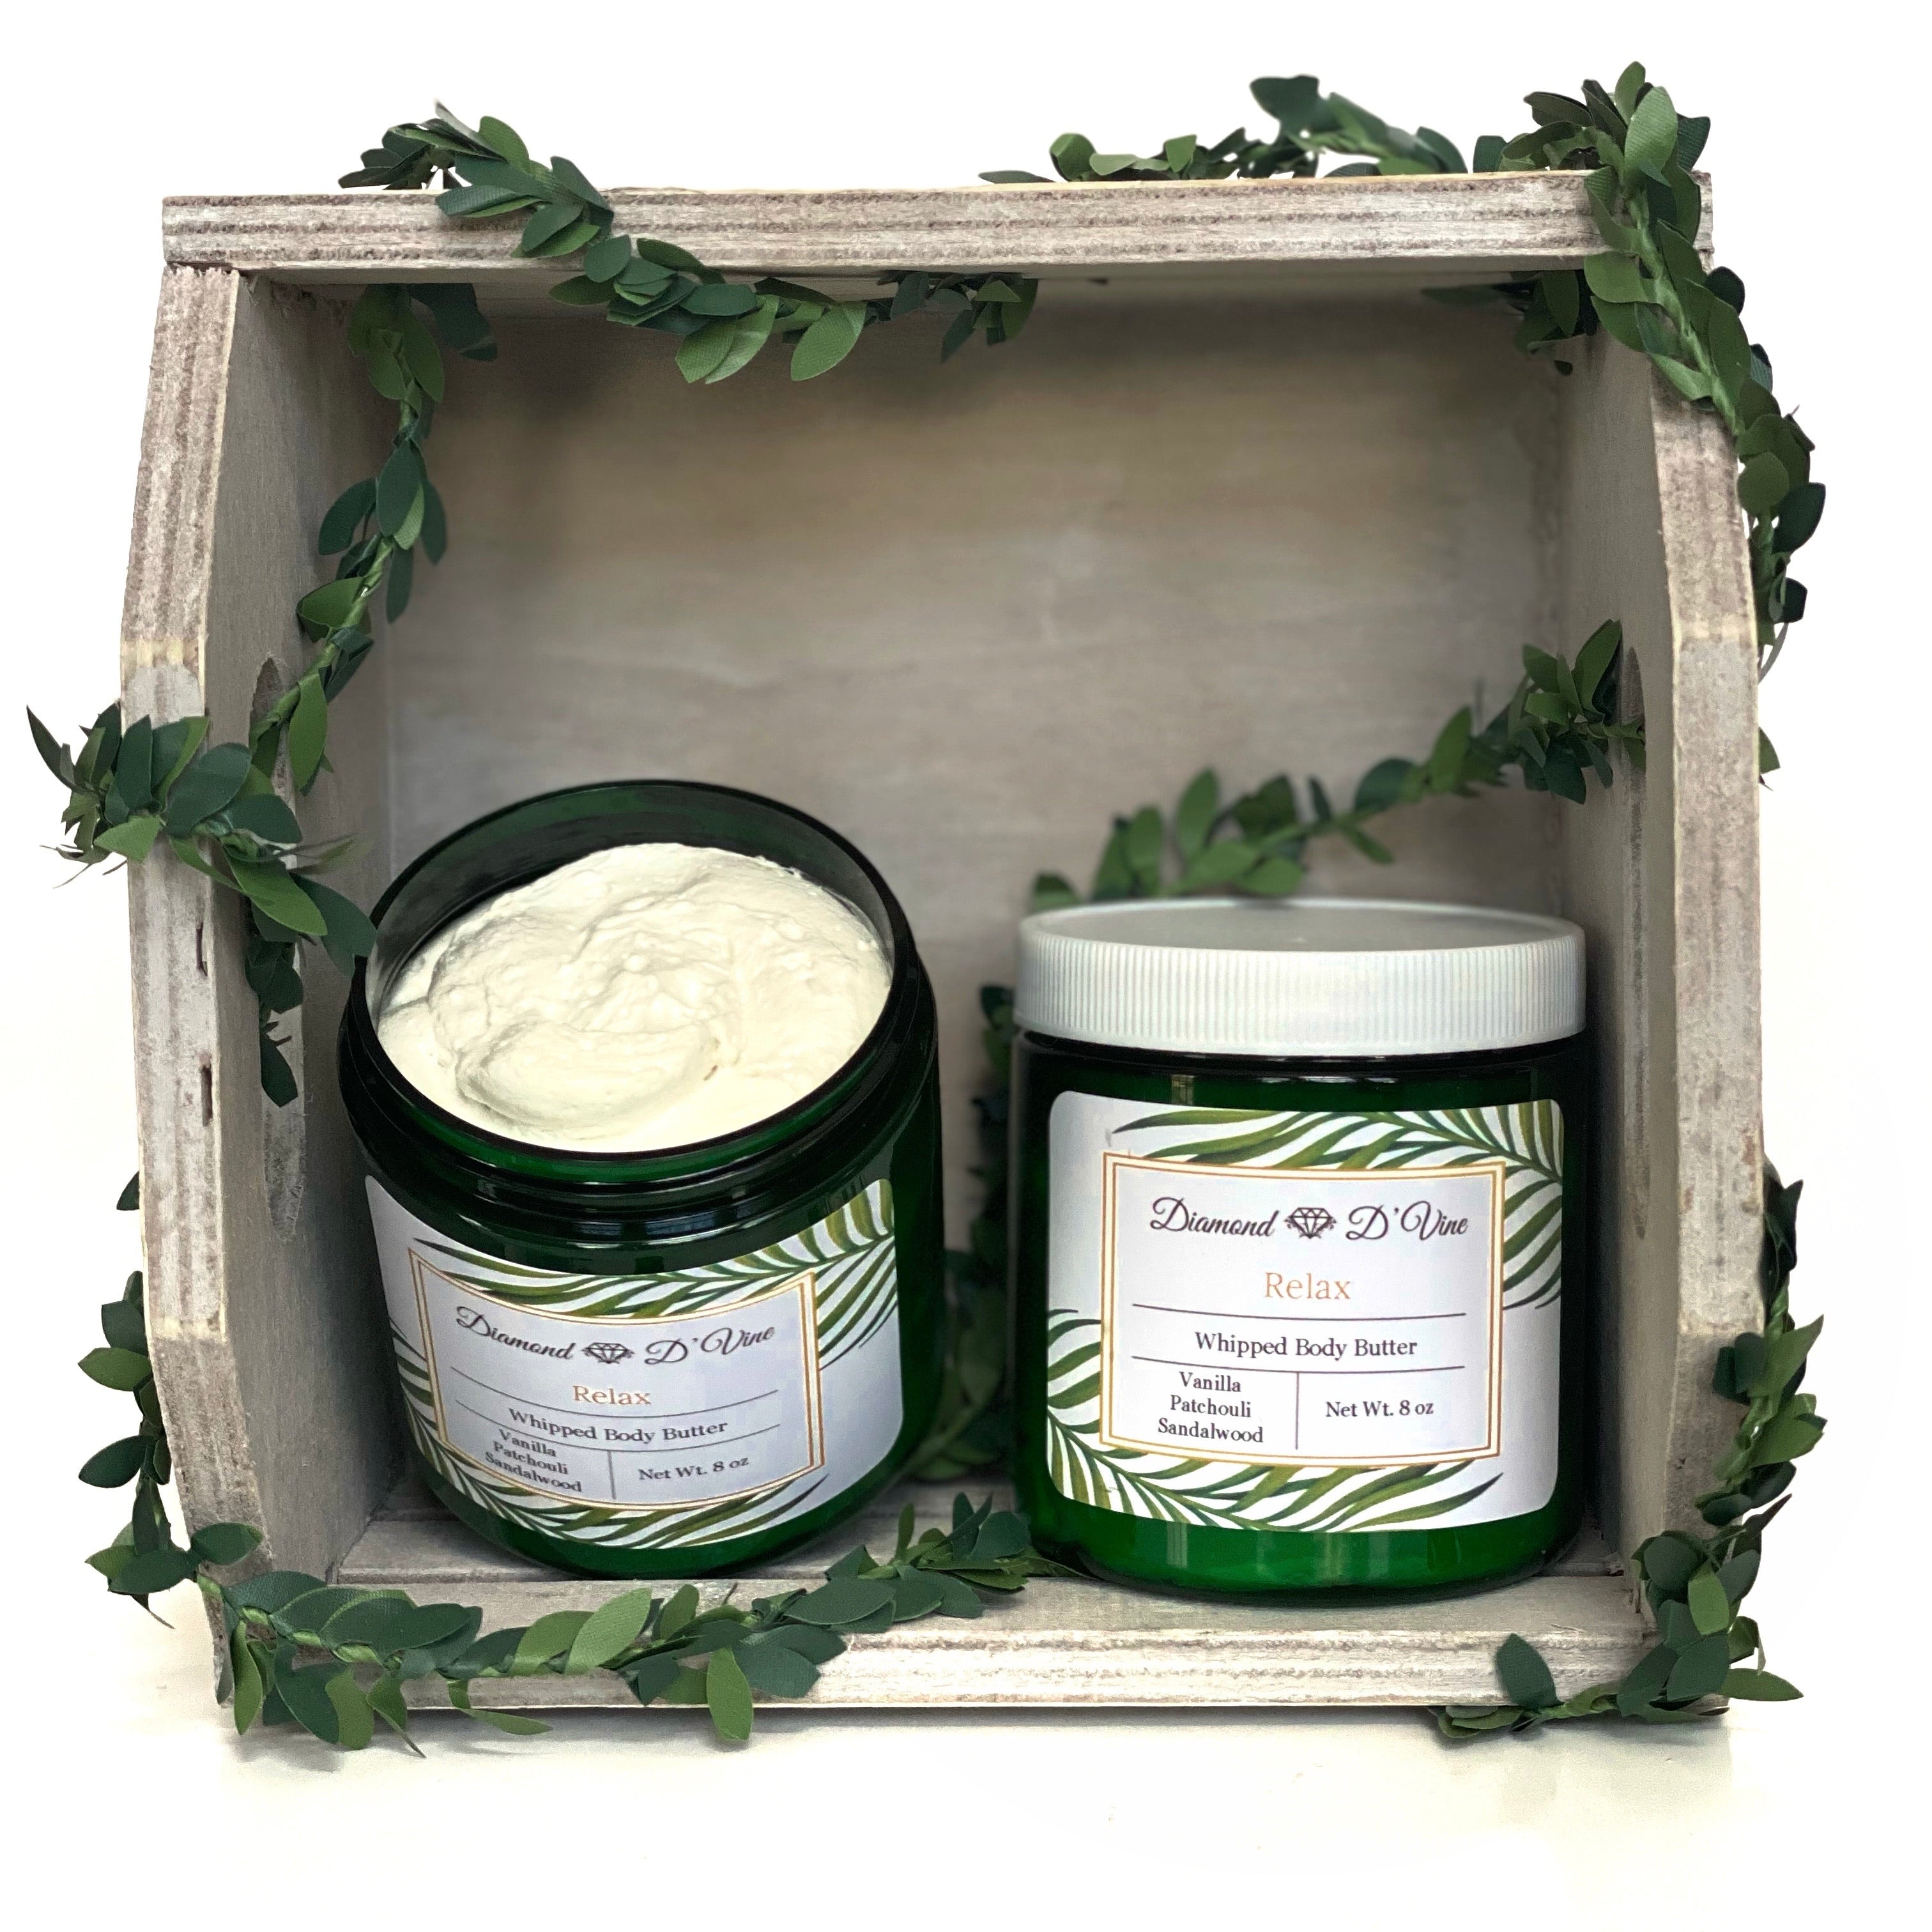 Relax- Whipped Body Butter